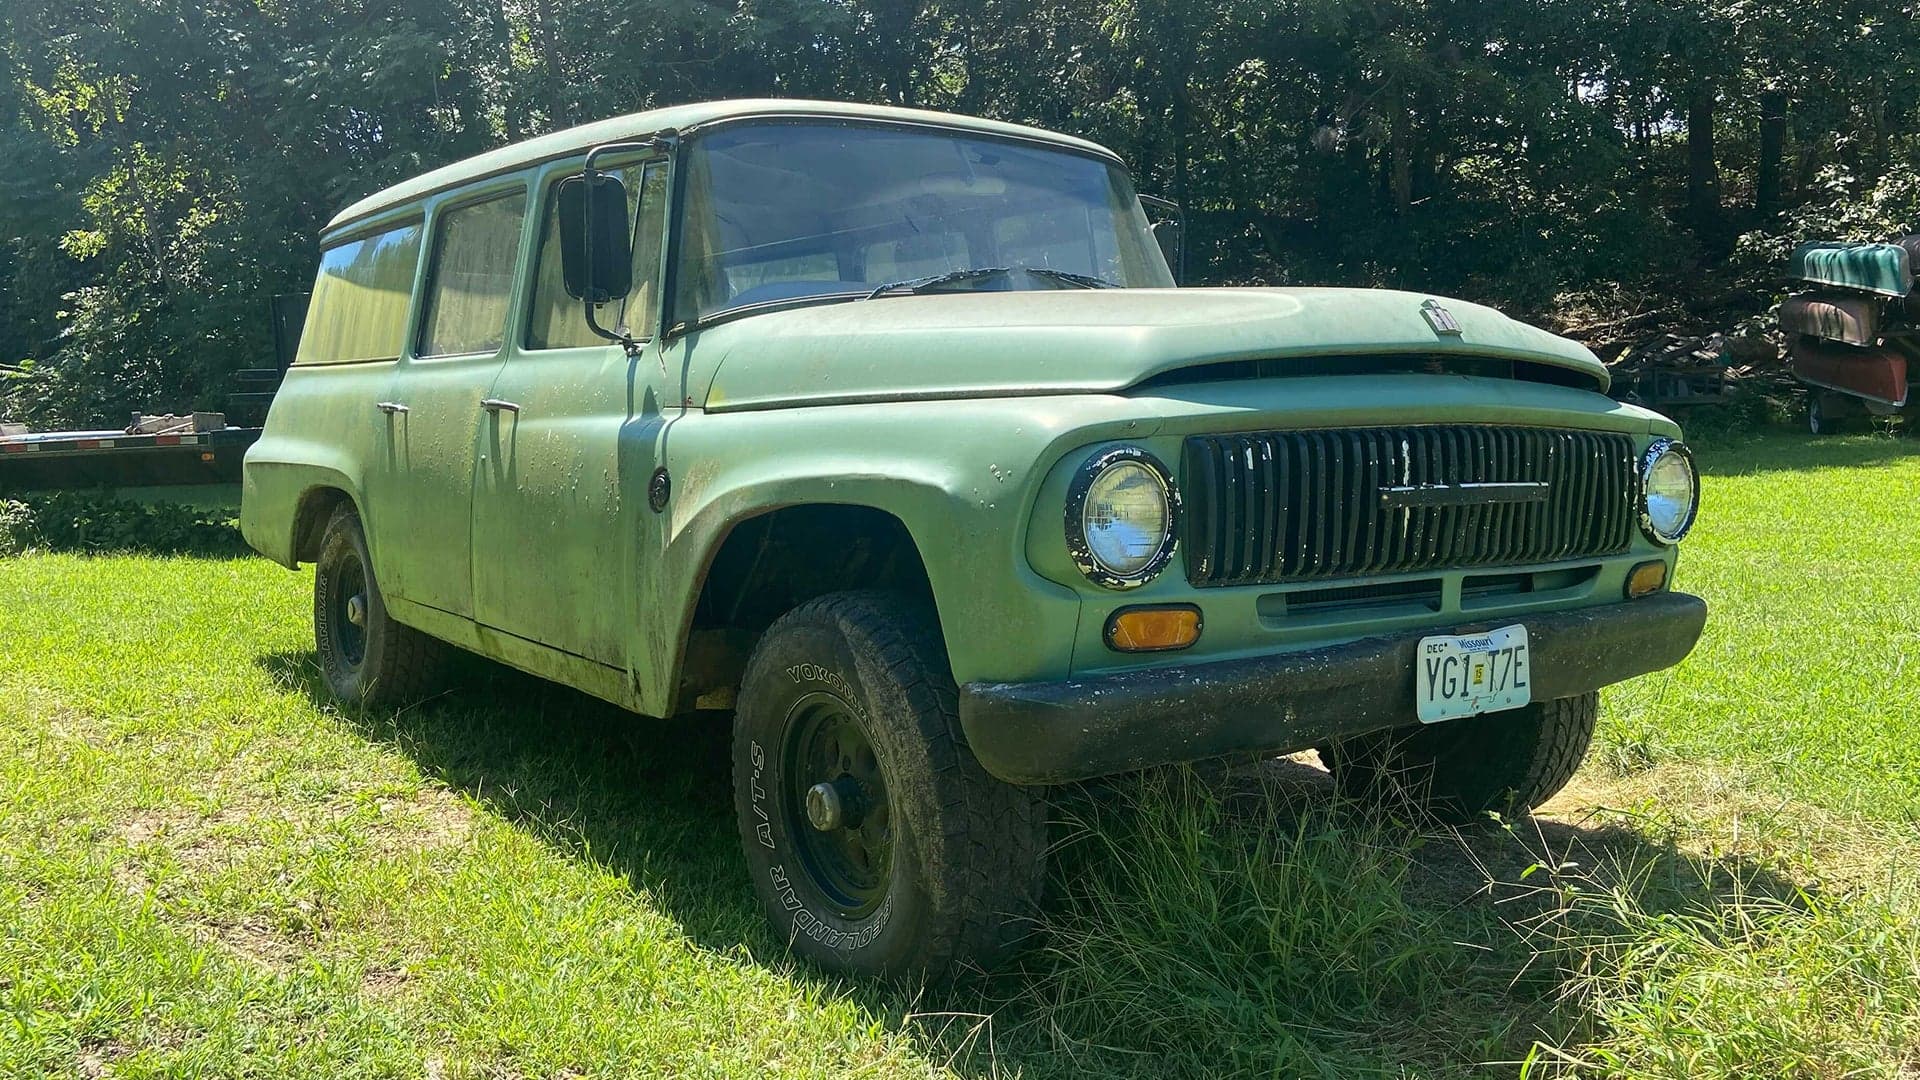 I Bought a 1965 IH Travelall Sight Unseen for $1,500. It Has a Zombie Mural on the Back